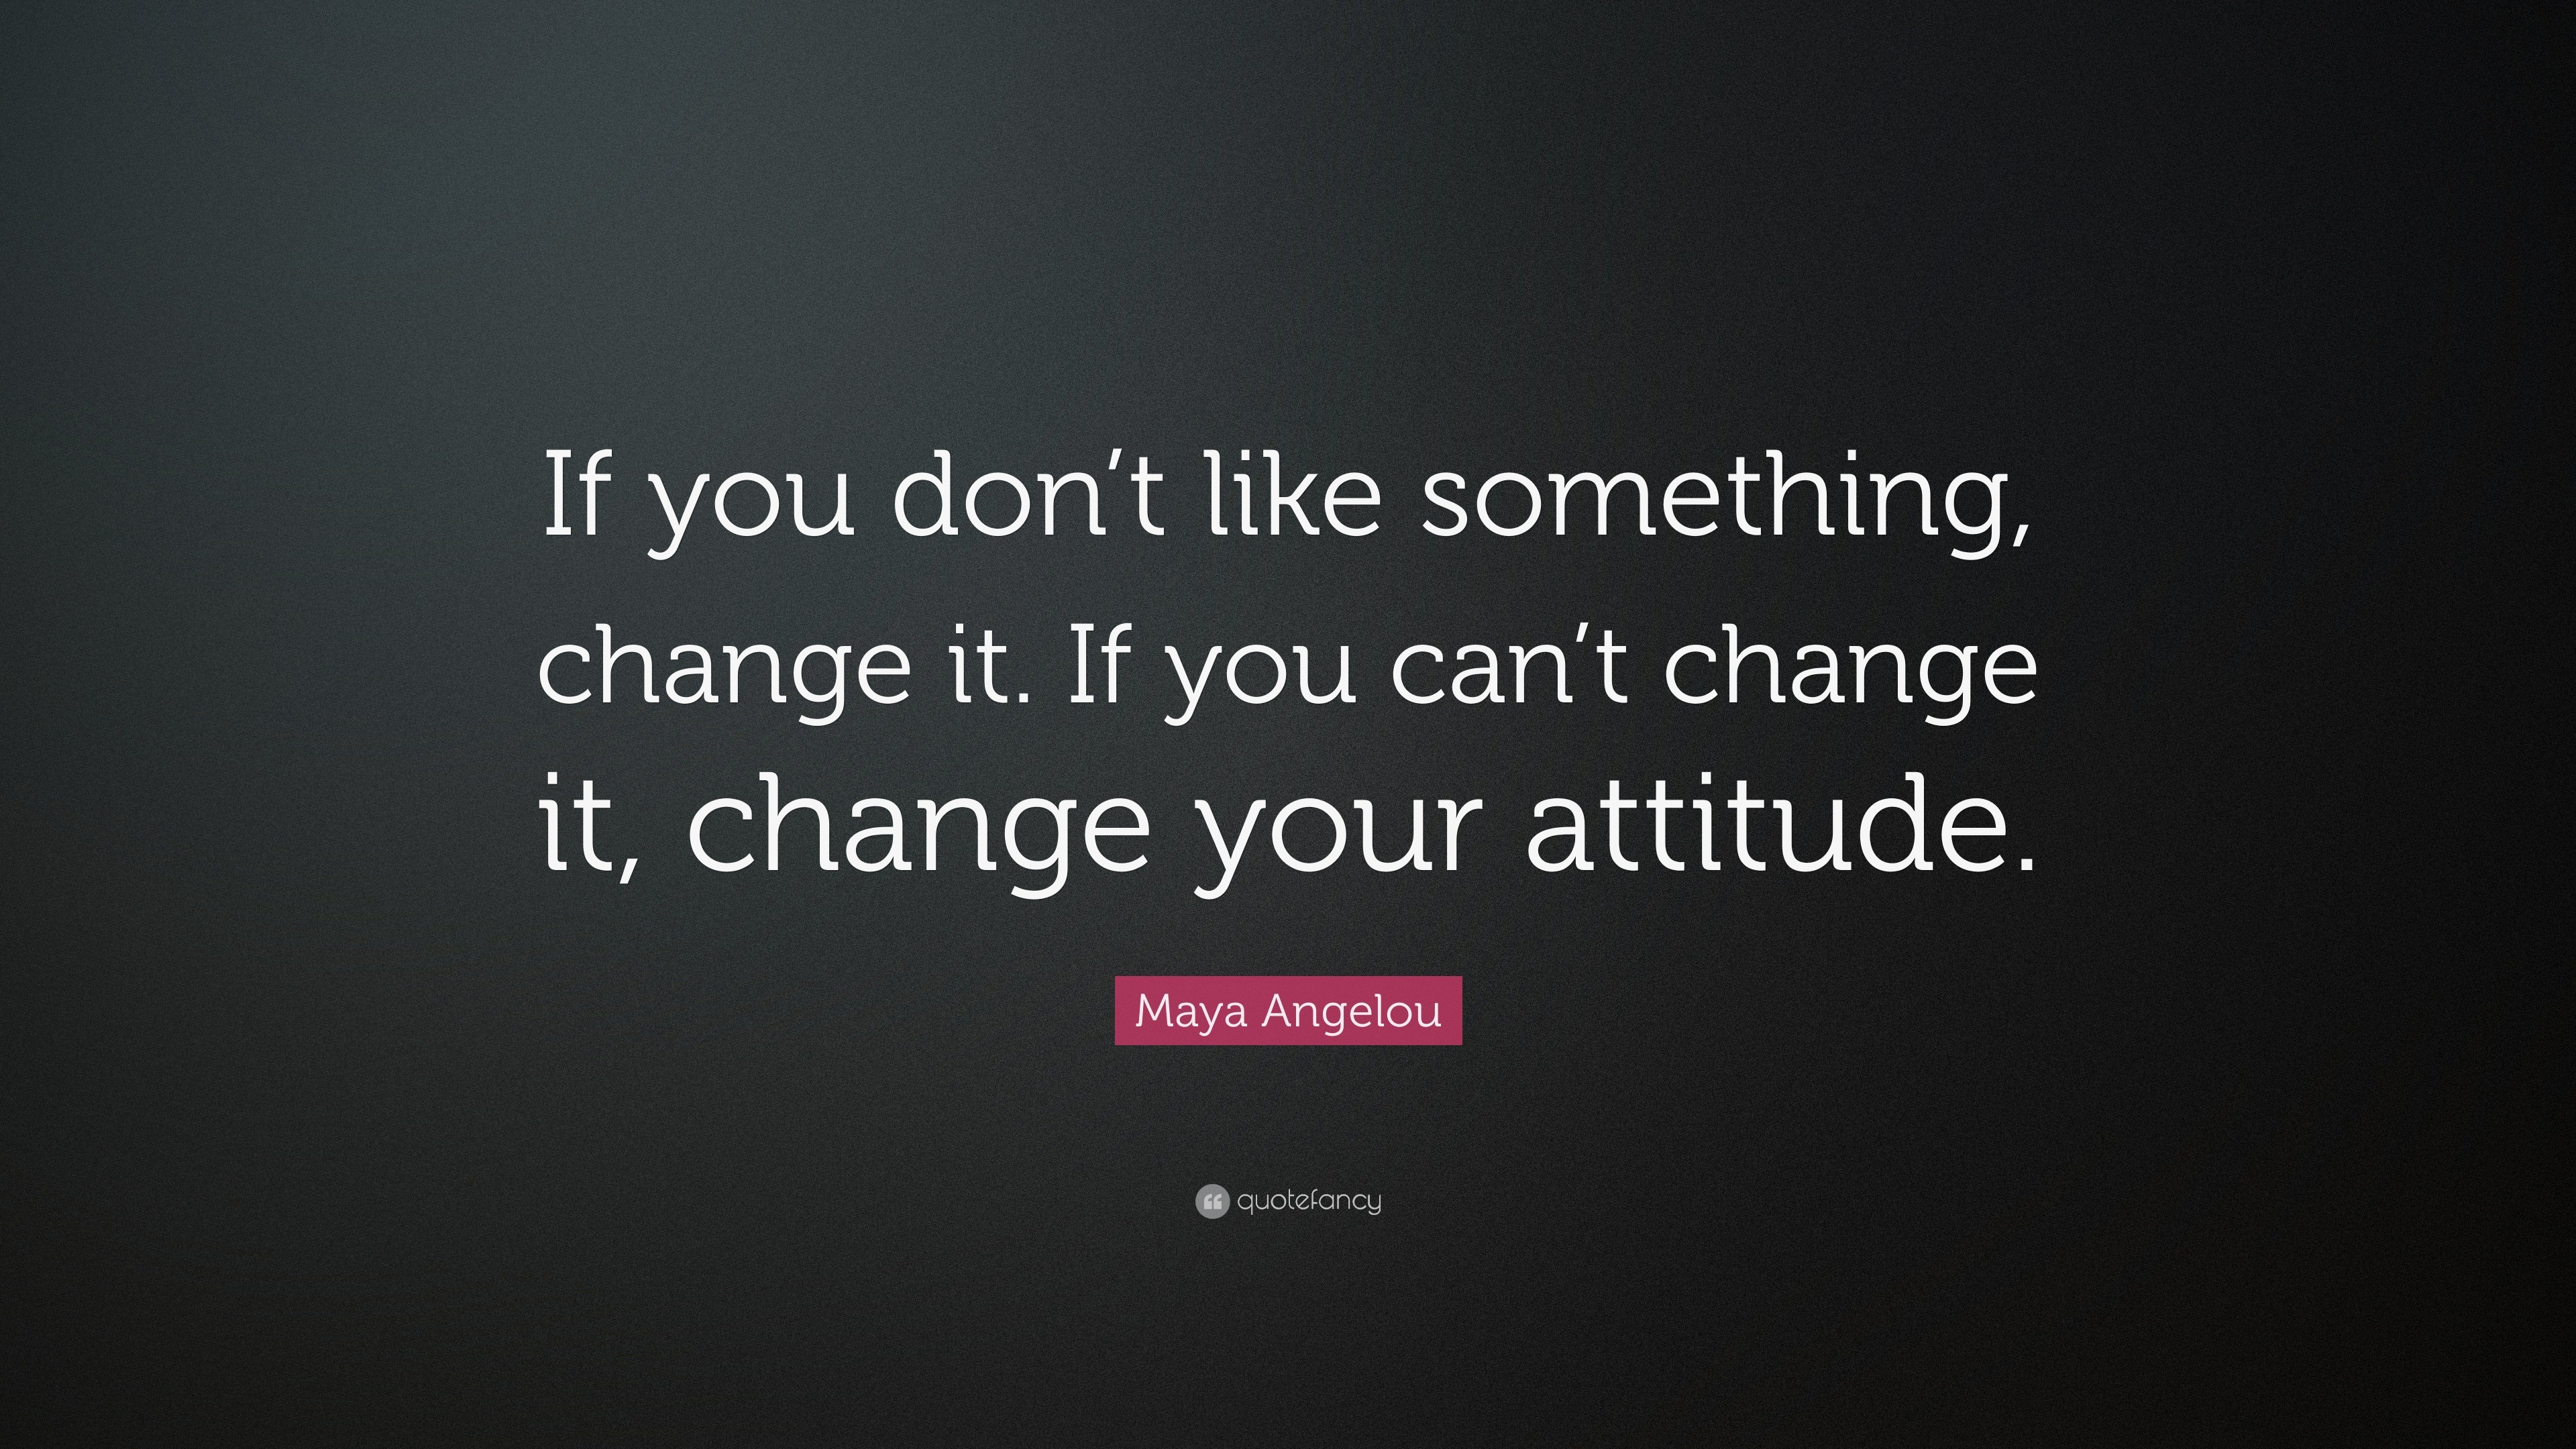 Game don t change. Can you change. Change something. If you can't change the situation change your attitude to it. If you don't like something change it.